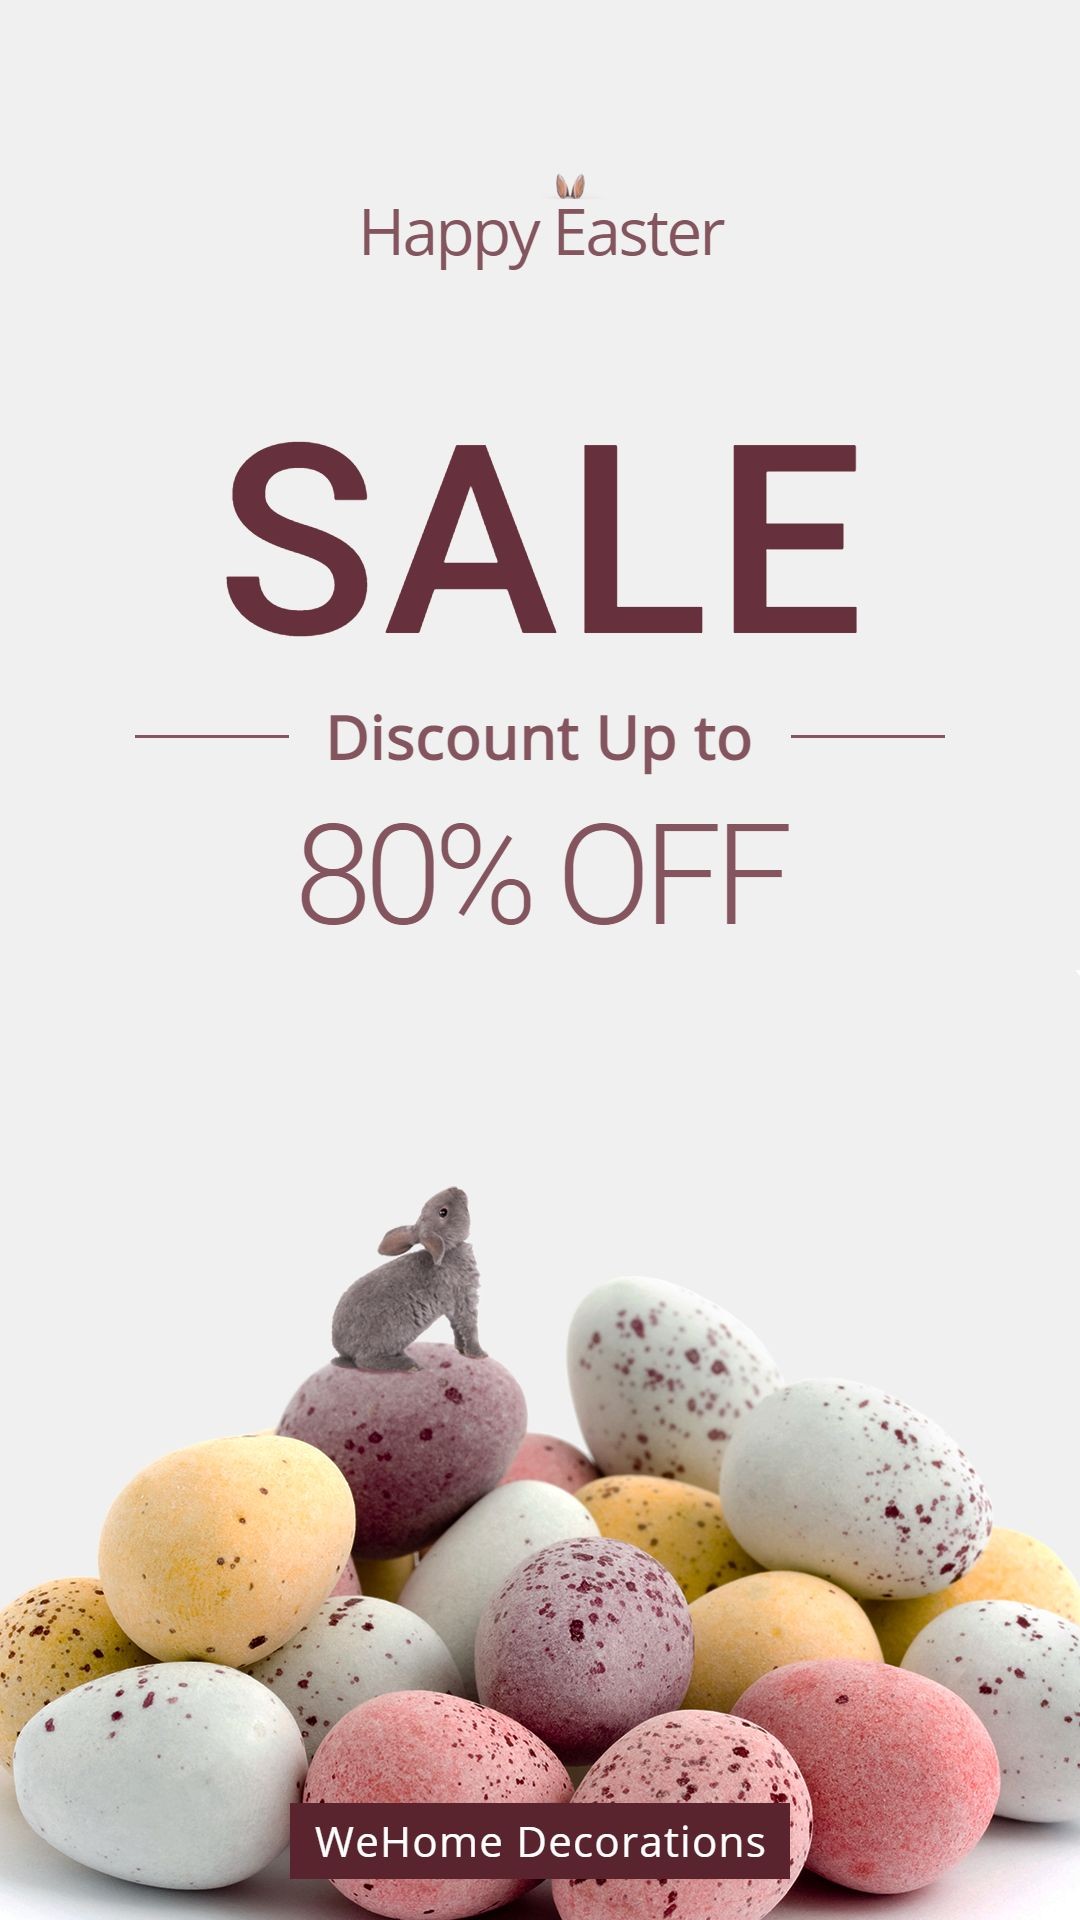 Easter Egg Home Decorations Sale Promotion Ecommerce Story预览效果